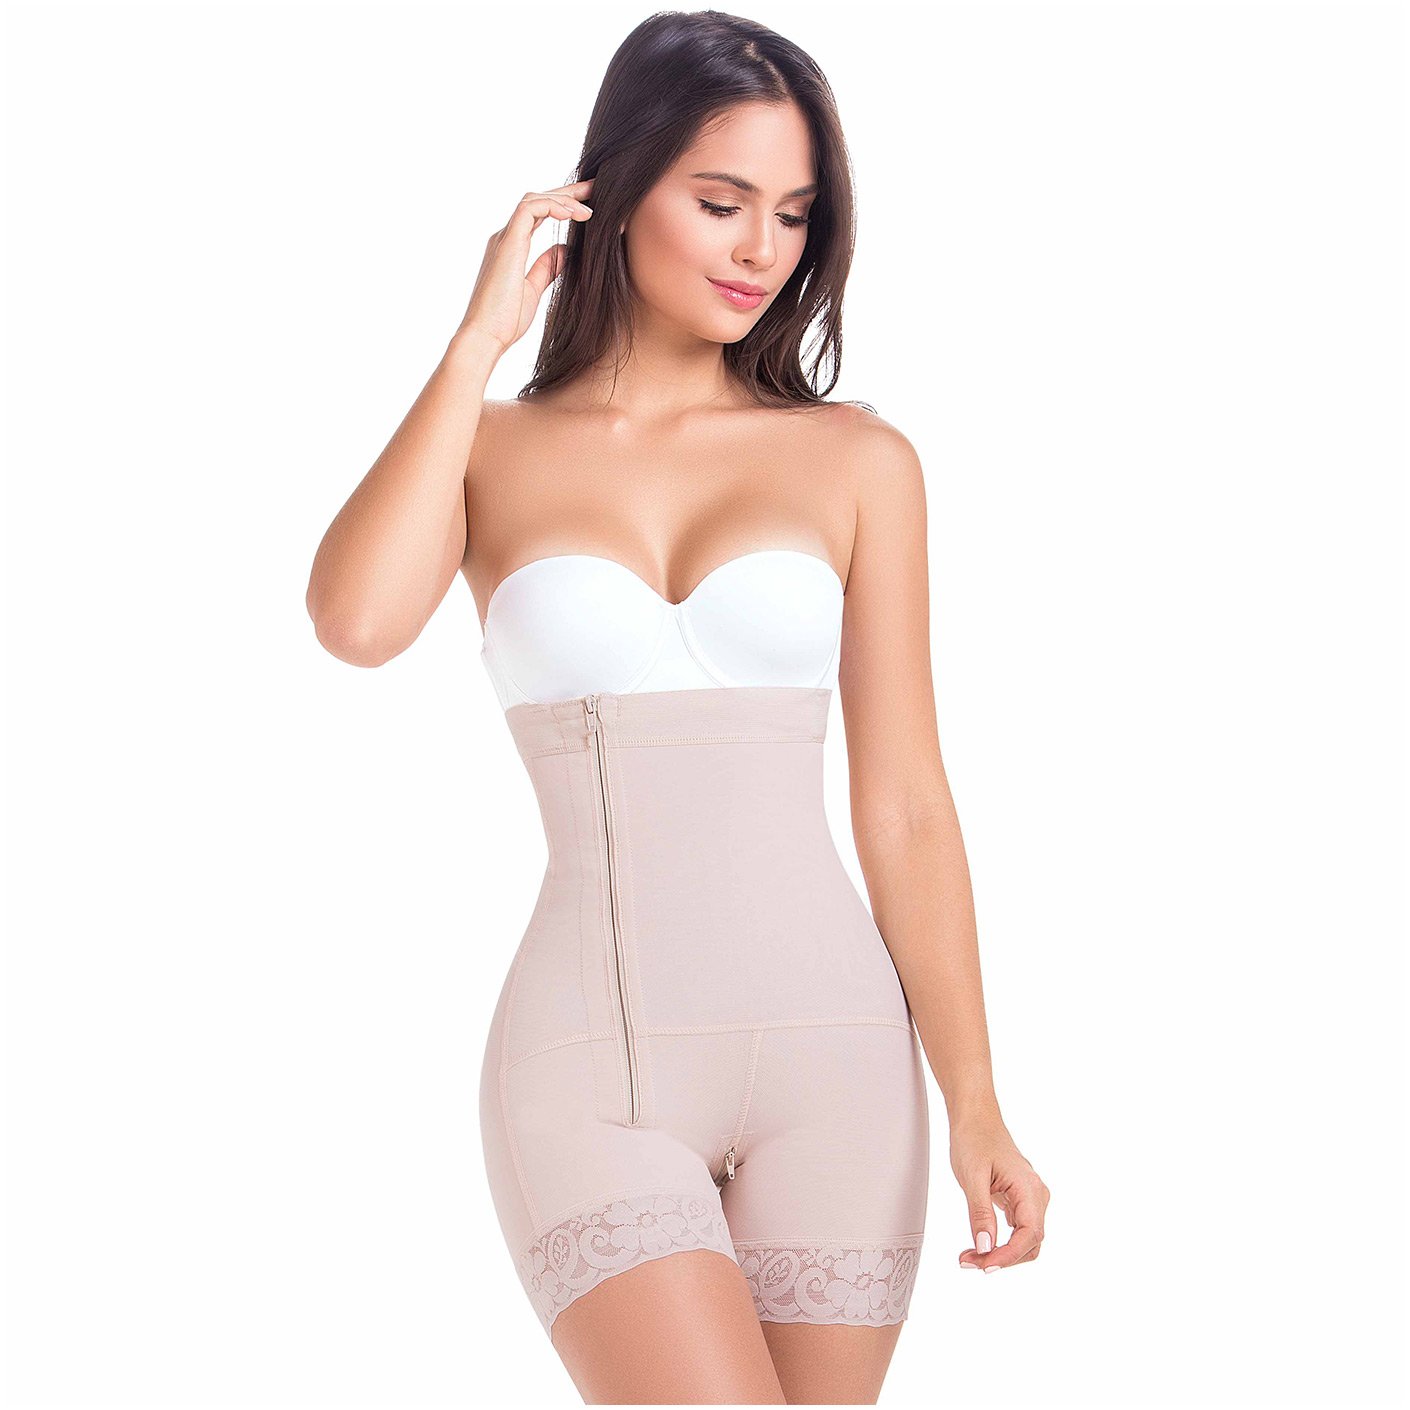 Silene fajas. Strapless short girdle. Assorted colors. Fajas colombianas 